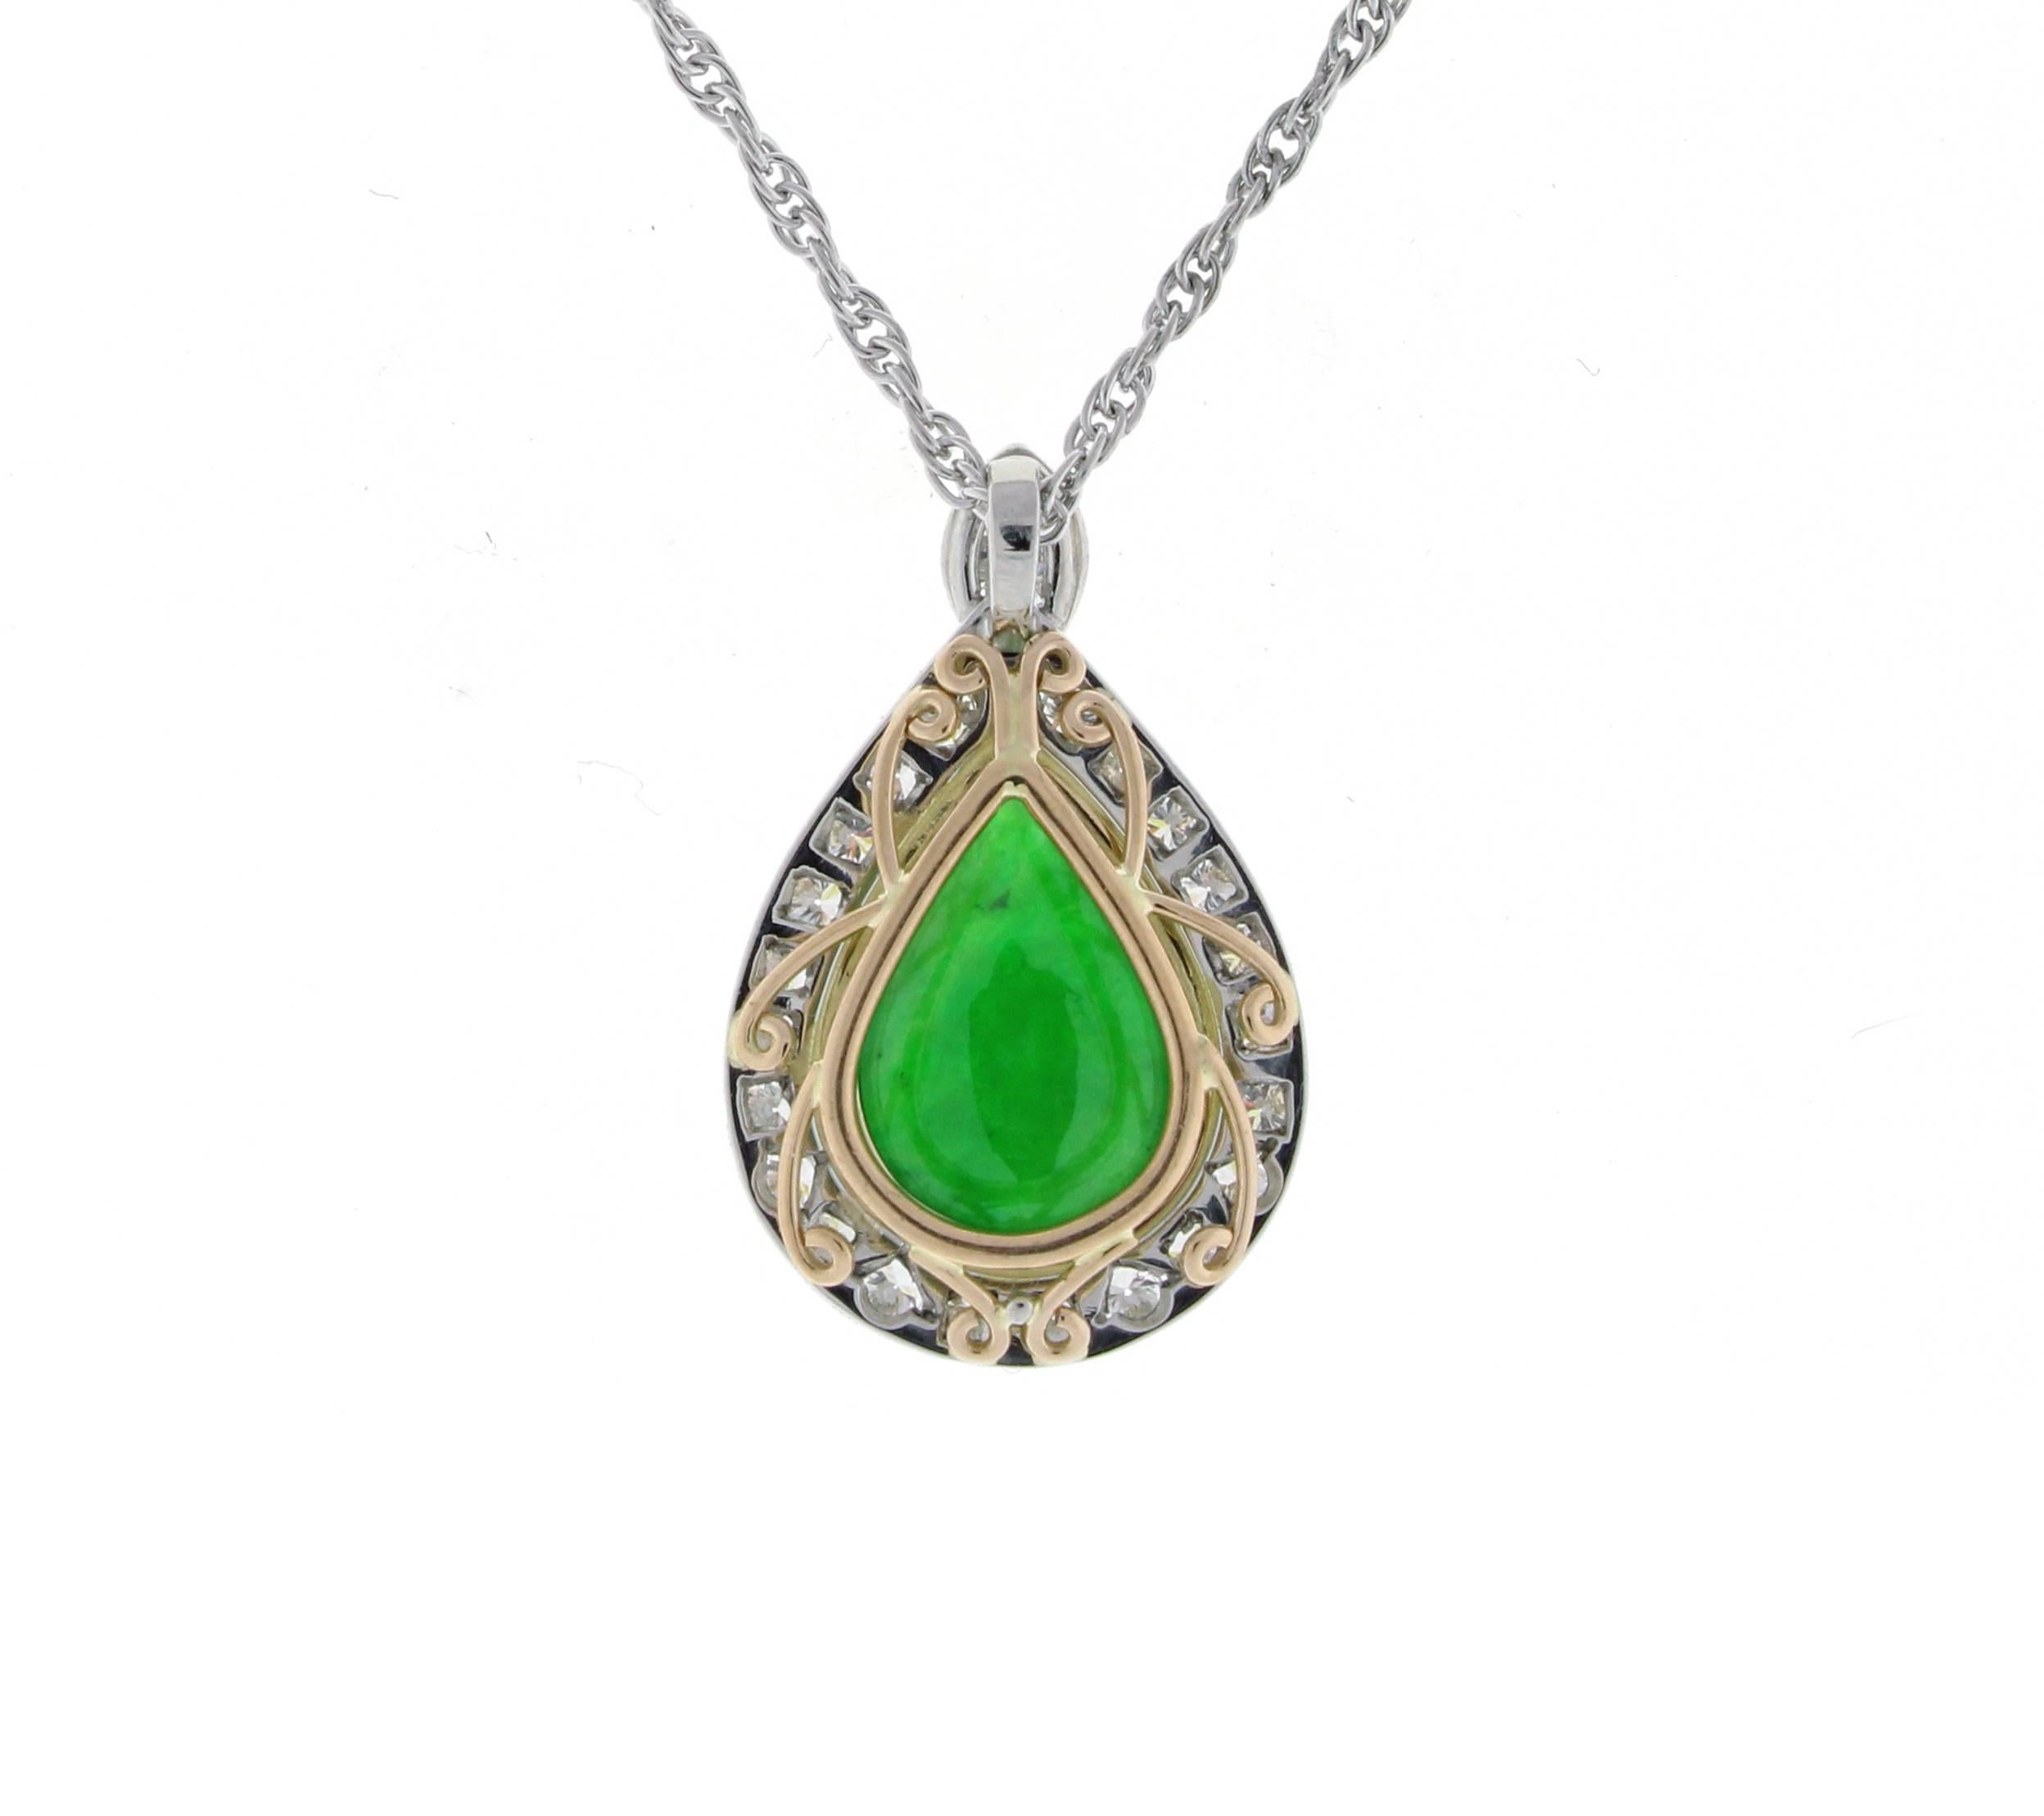 From the master jewelers of Pampillonia, a natural jadeite jade and diamond pendant. The pendant features a pear shaped jadeite jade double cabochon weighing 2.71 carat and 23 diamonds .57 carats. Completely hand made in platinum and 18 akart peach